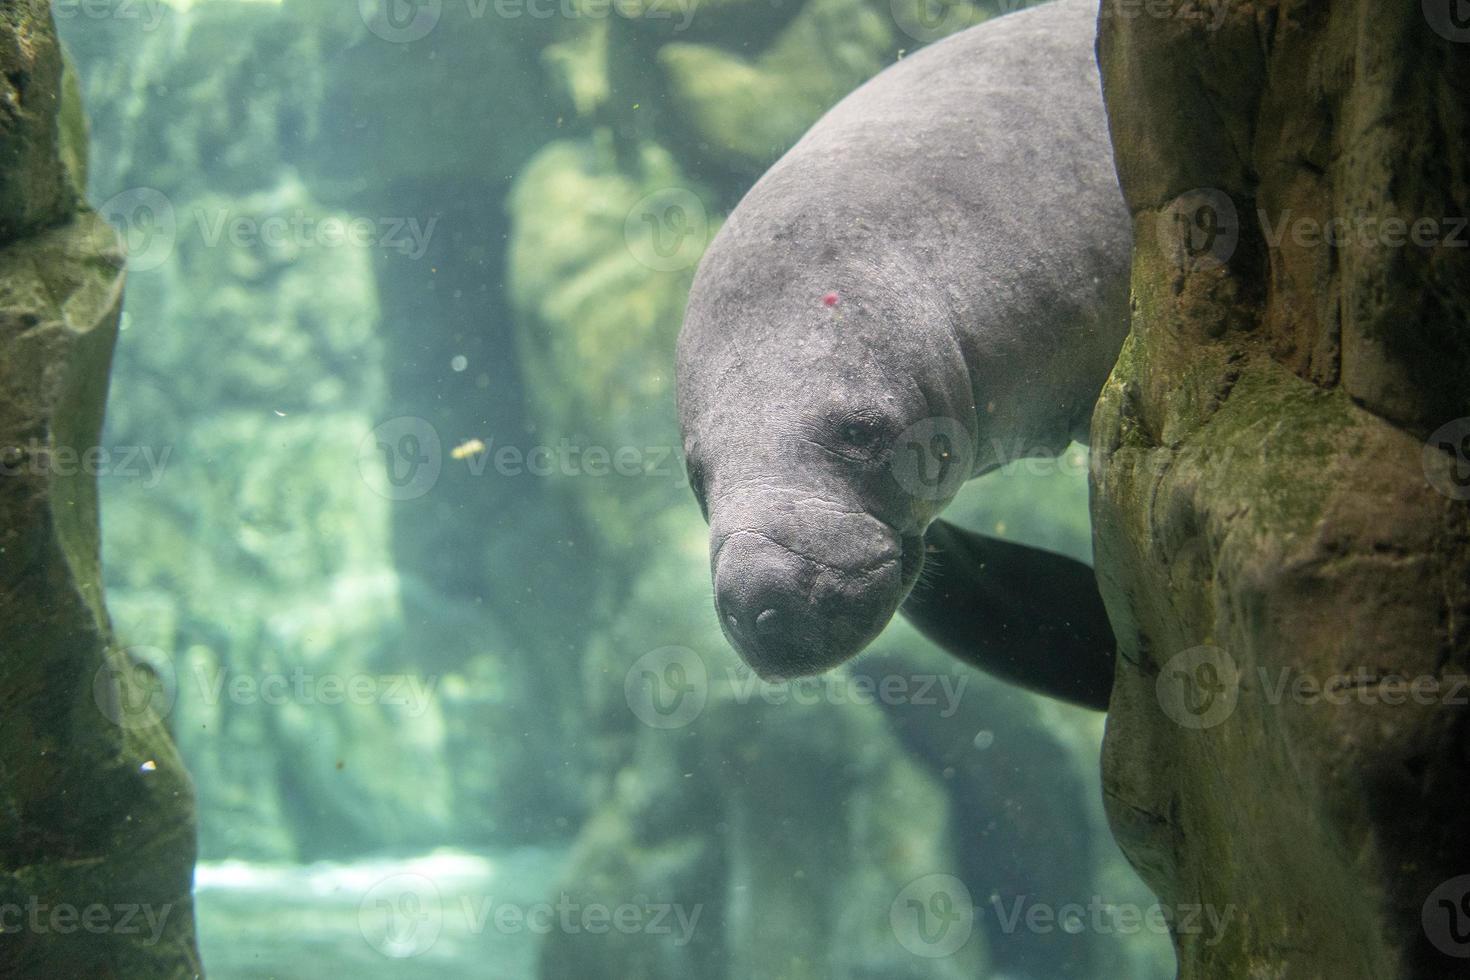 manatee close up portrait looking at you photo